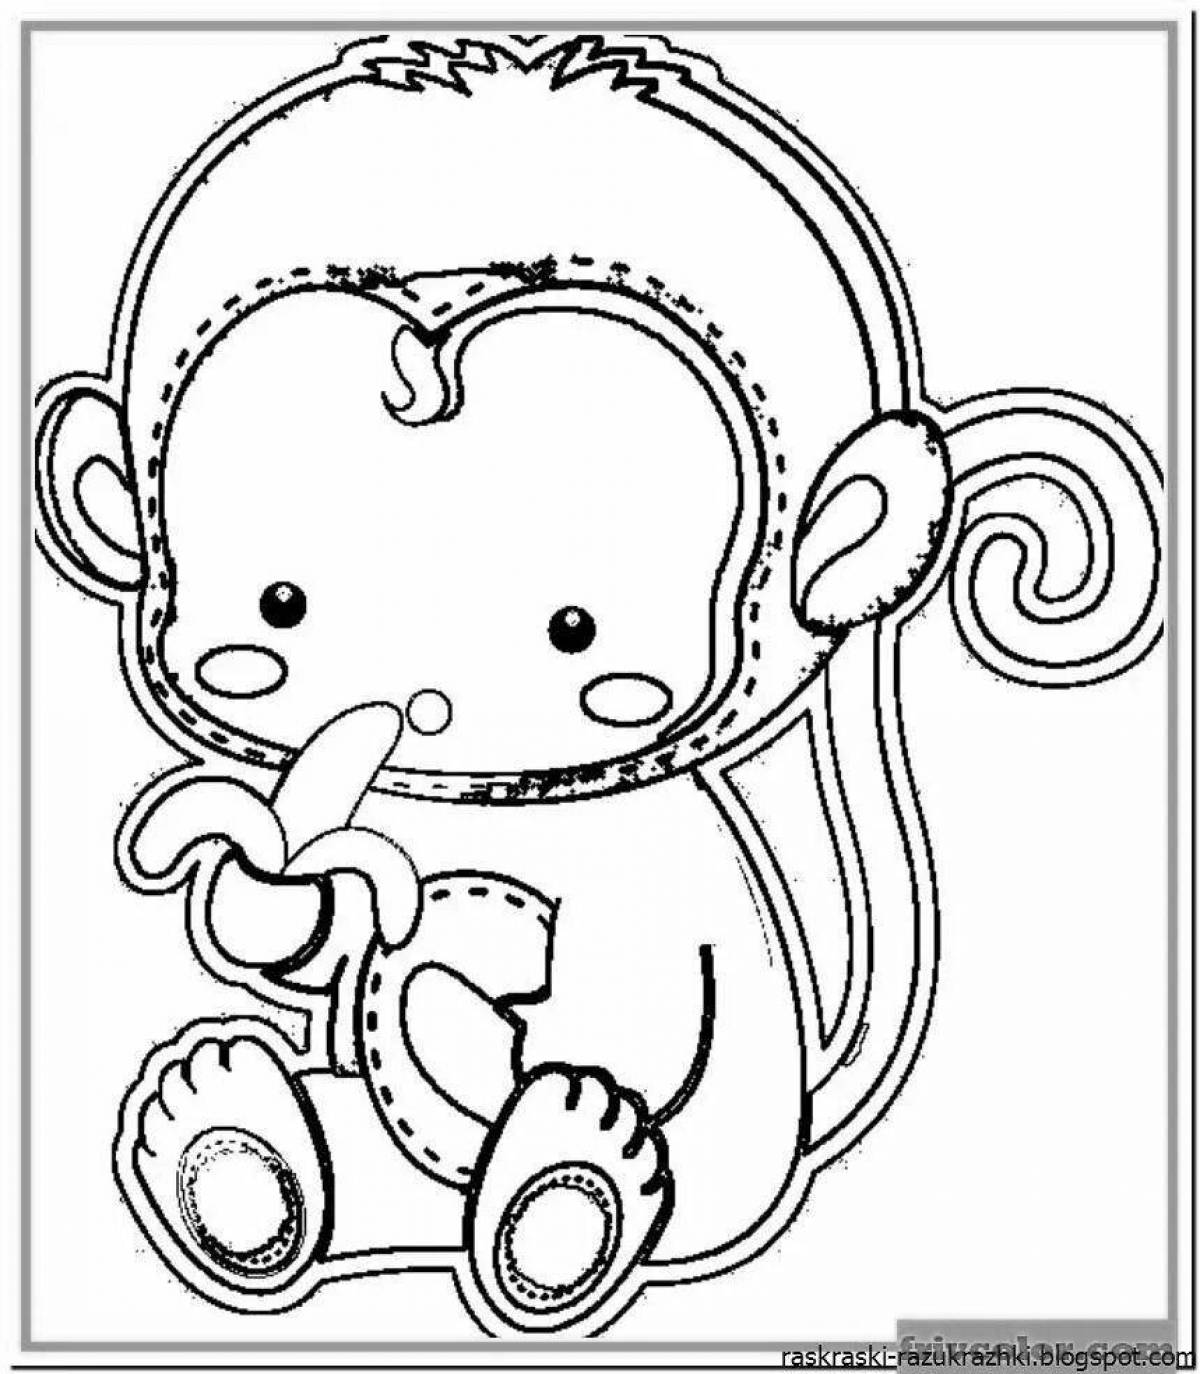 Exquisite monkey coloring book